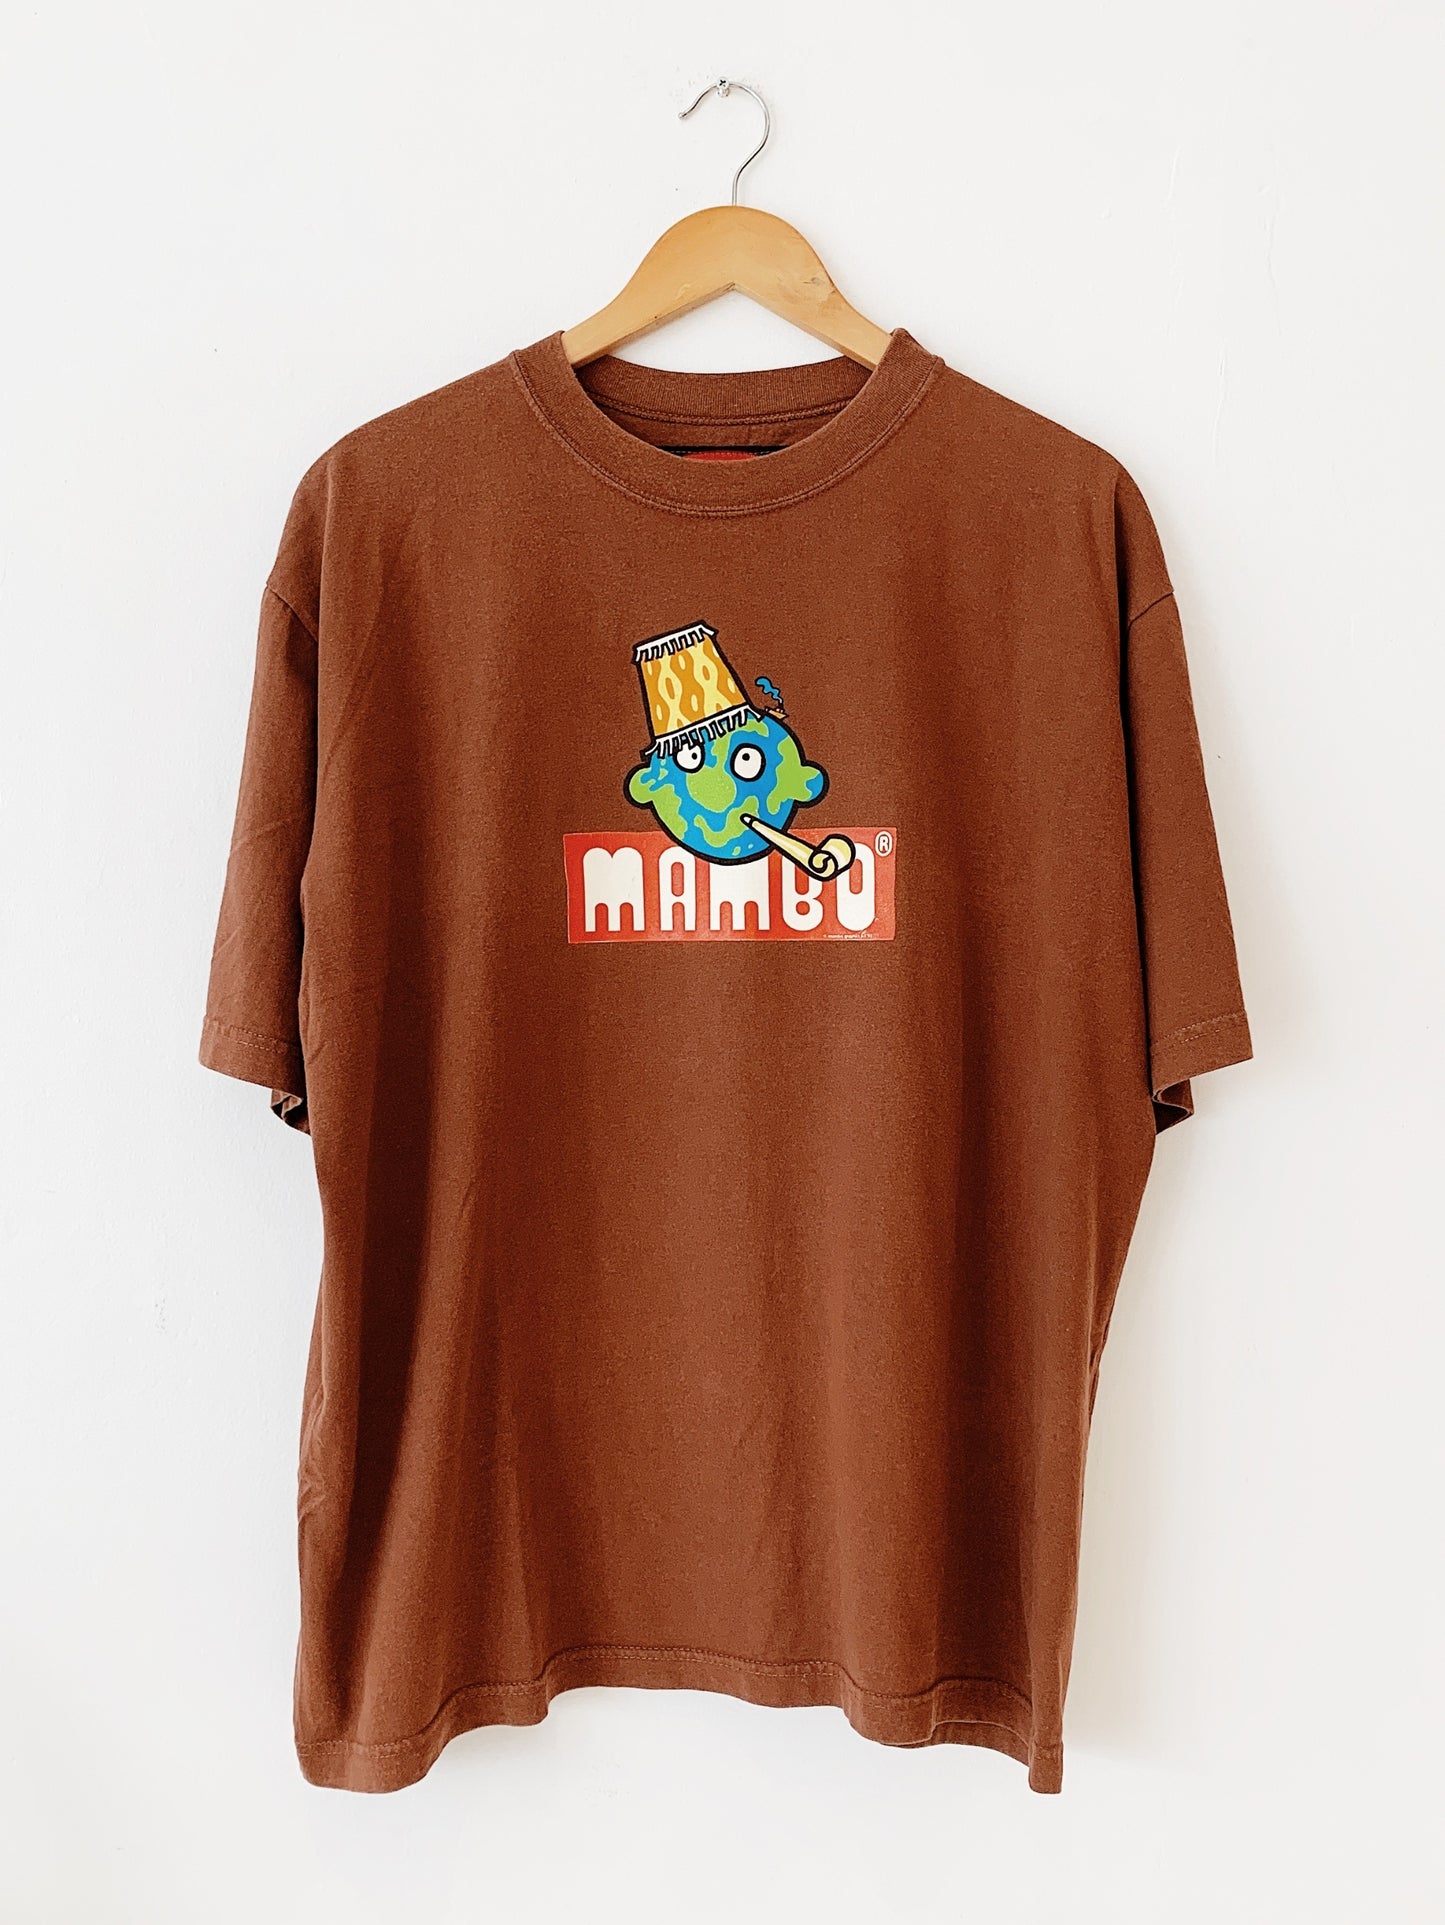 Vintage Paul McNeil for Mambo "Act Global Drink Local" '97 T-Shirt